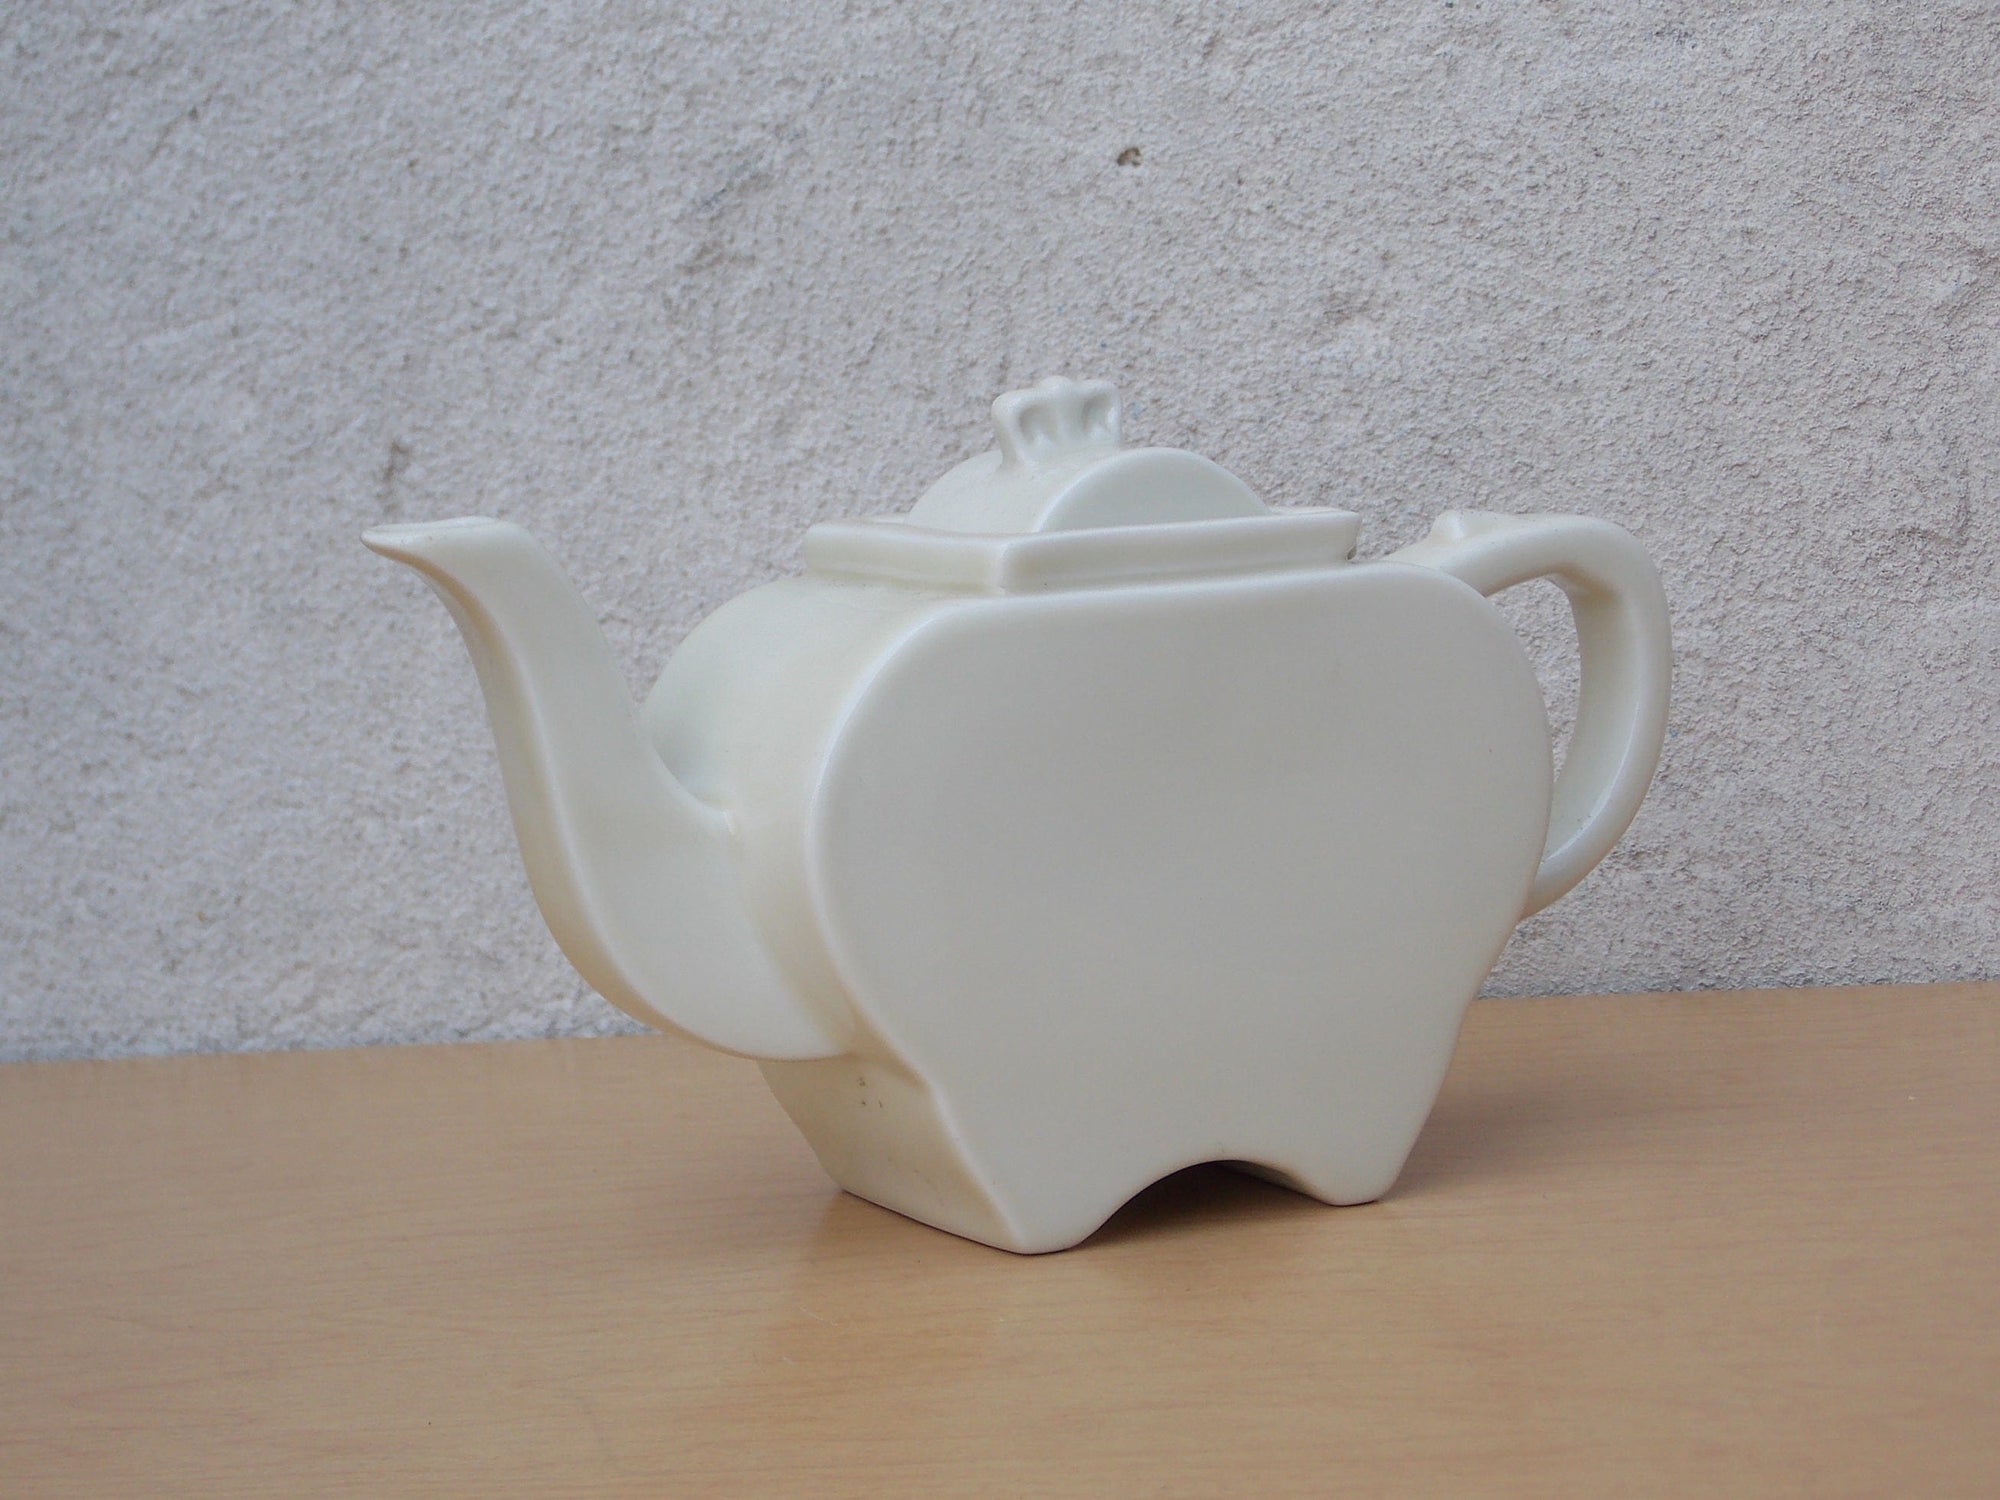 I Like Mikes Mid Century Modern Coffee Servers & Tea Pots Small White Interlocking Top Teapot by Fraunfelter